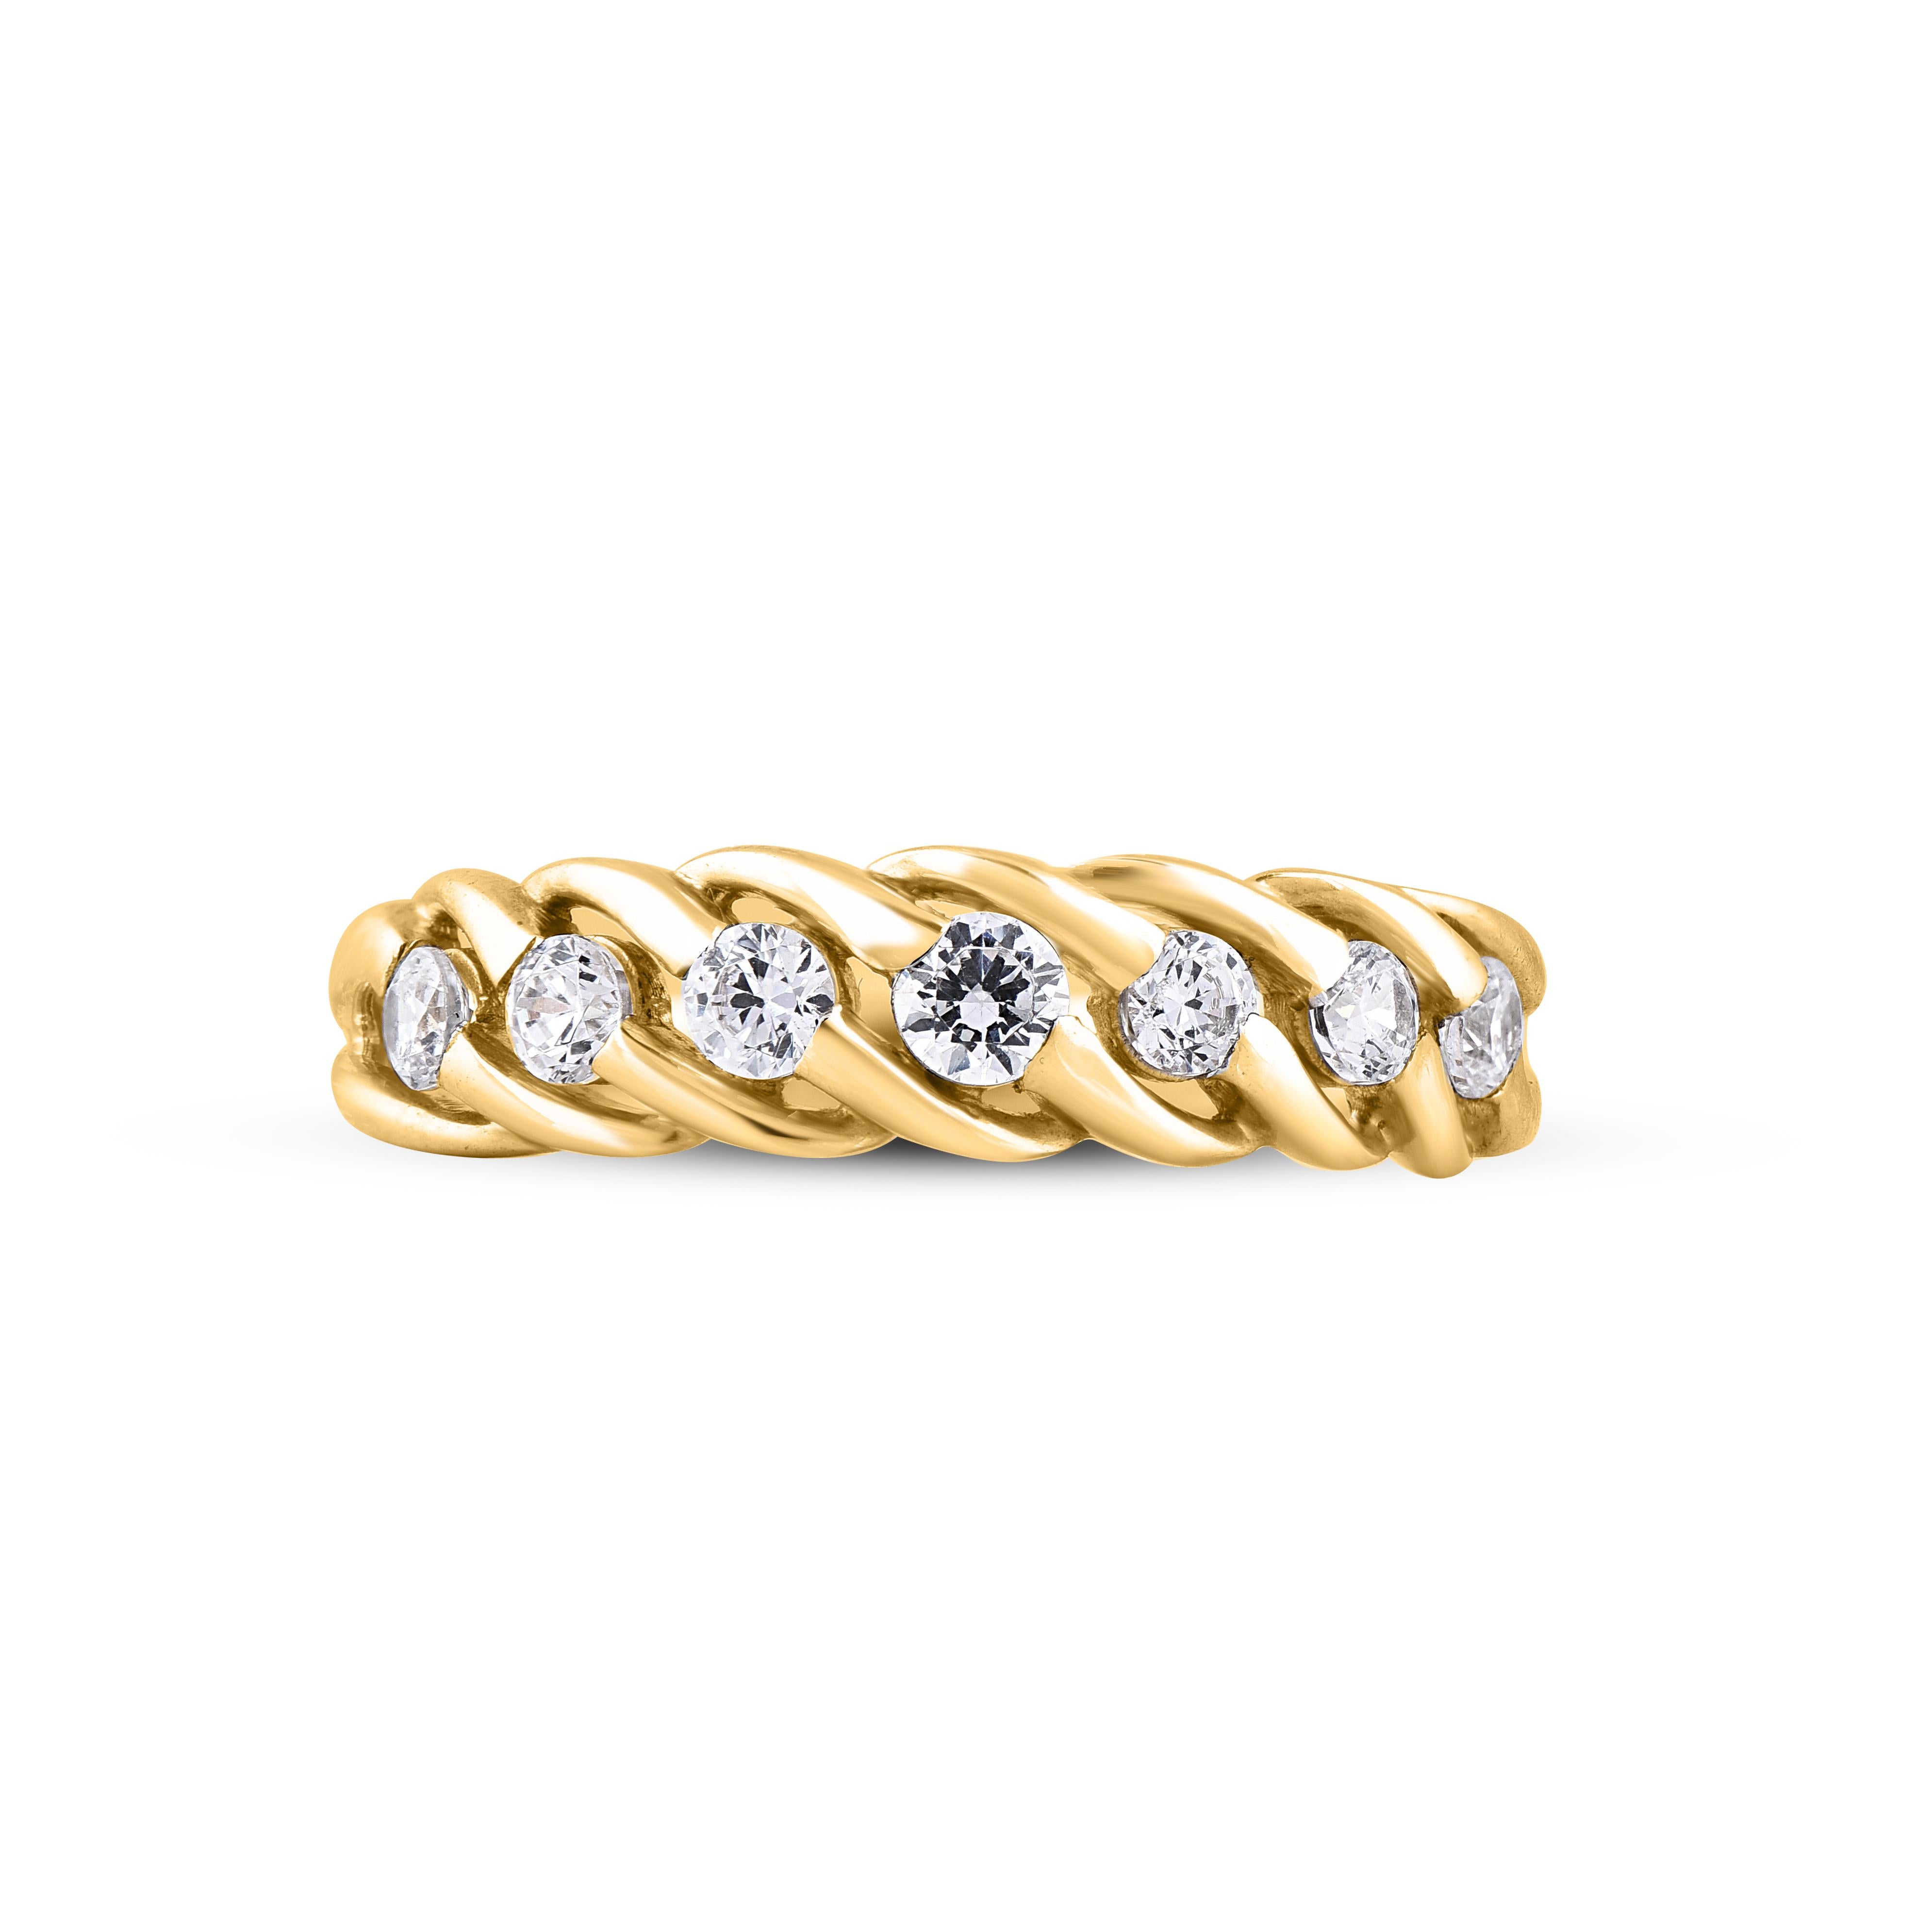 Give a touch of glamour to your fine jewelry collection with this diamond engagement band ring. This beautiful ring features shimmering brilliant cut diamonds in channel setting. Crafted in 14 karat yellow gold. The ring is studded with a total of 7